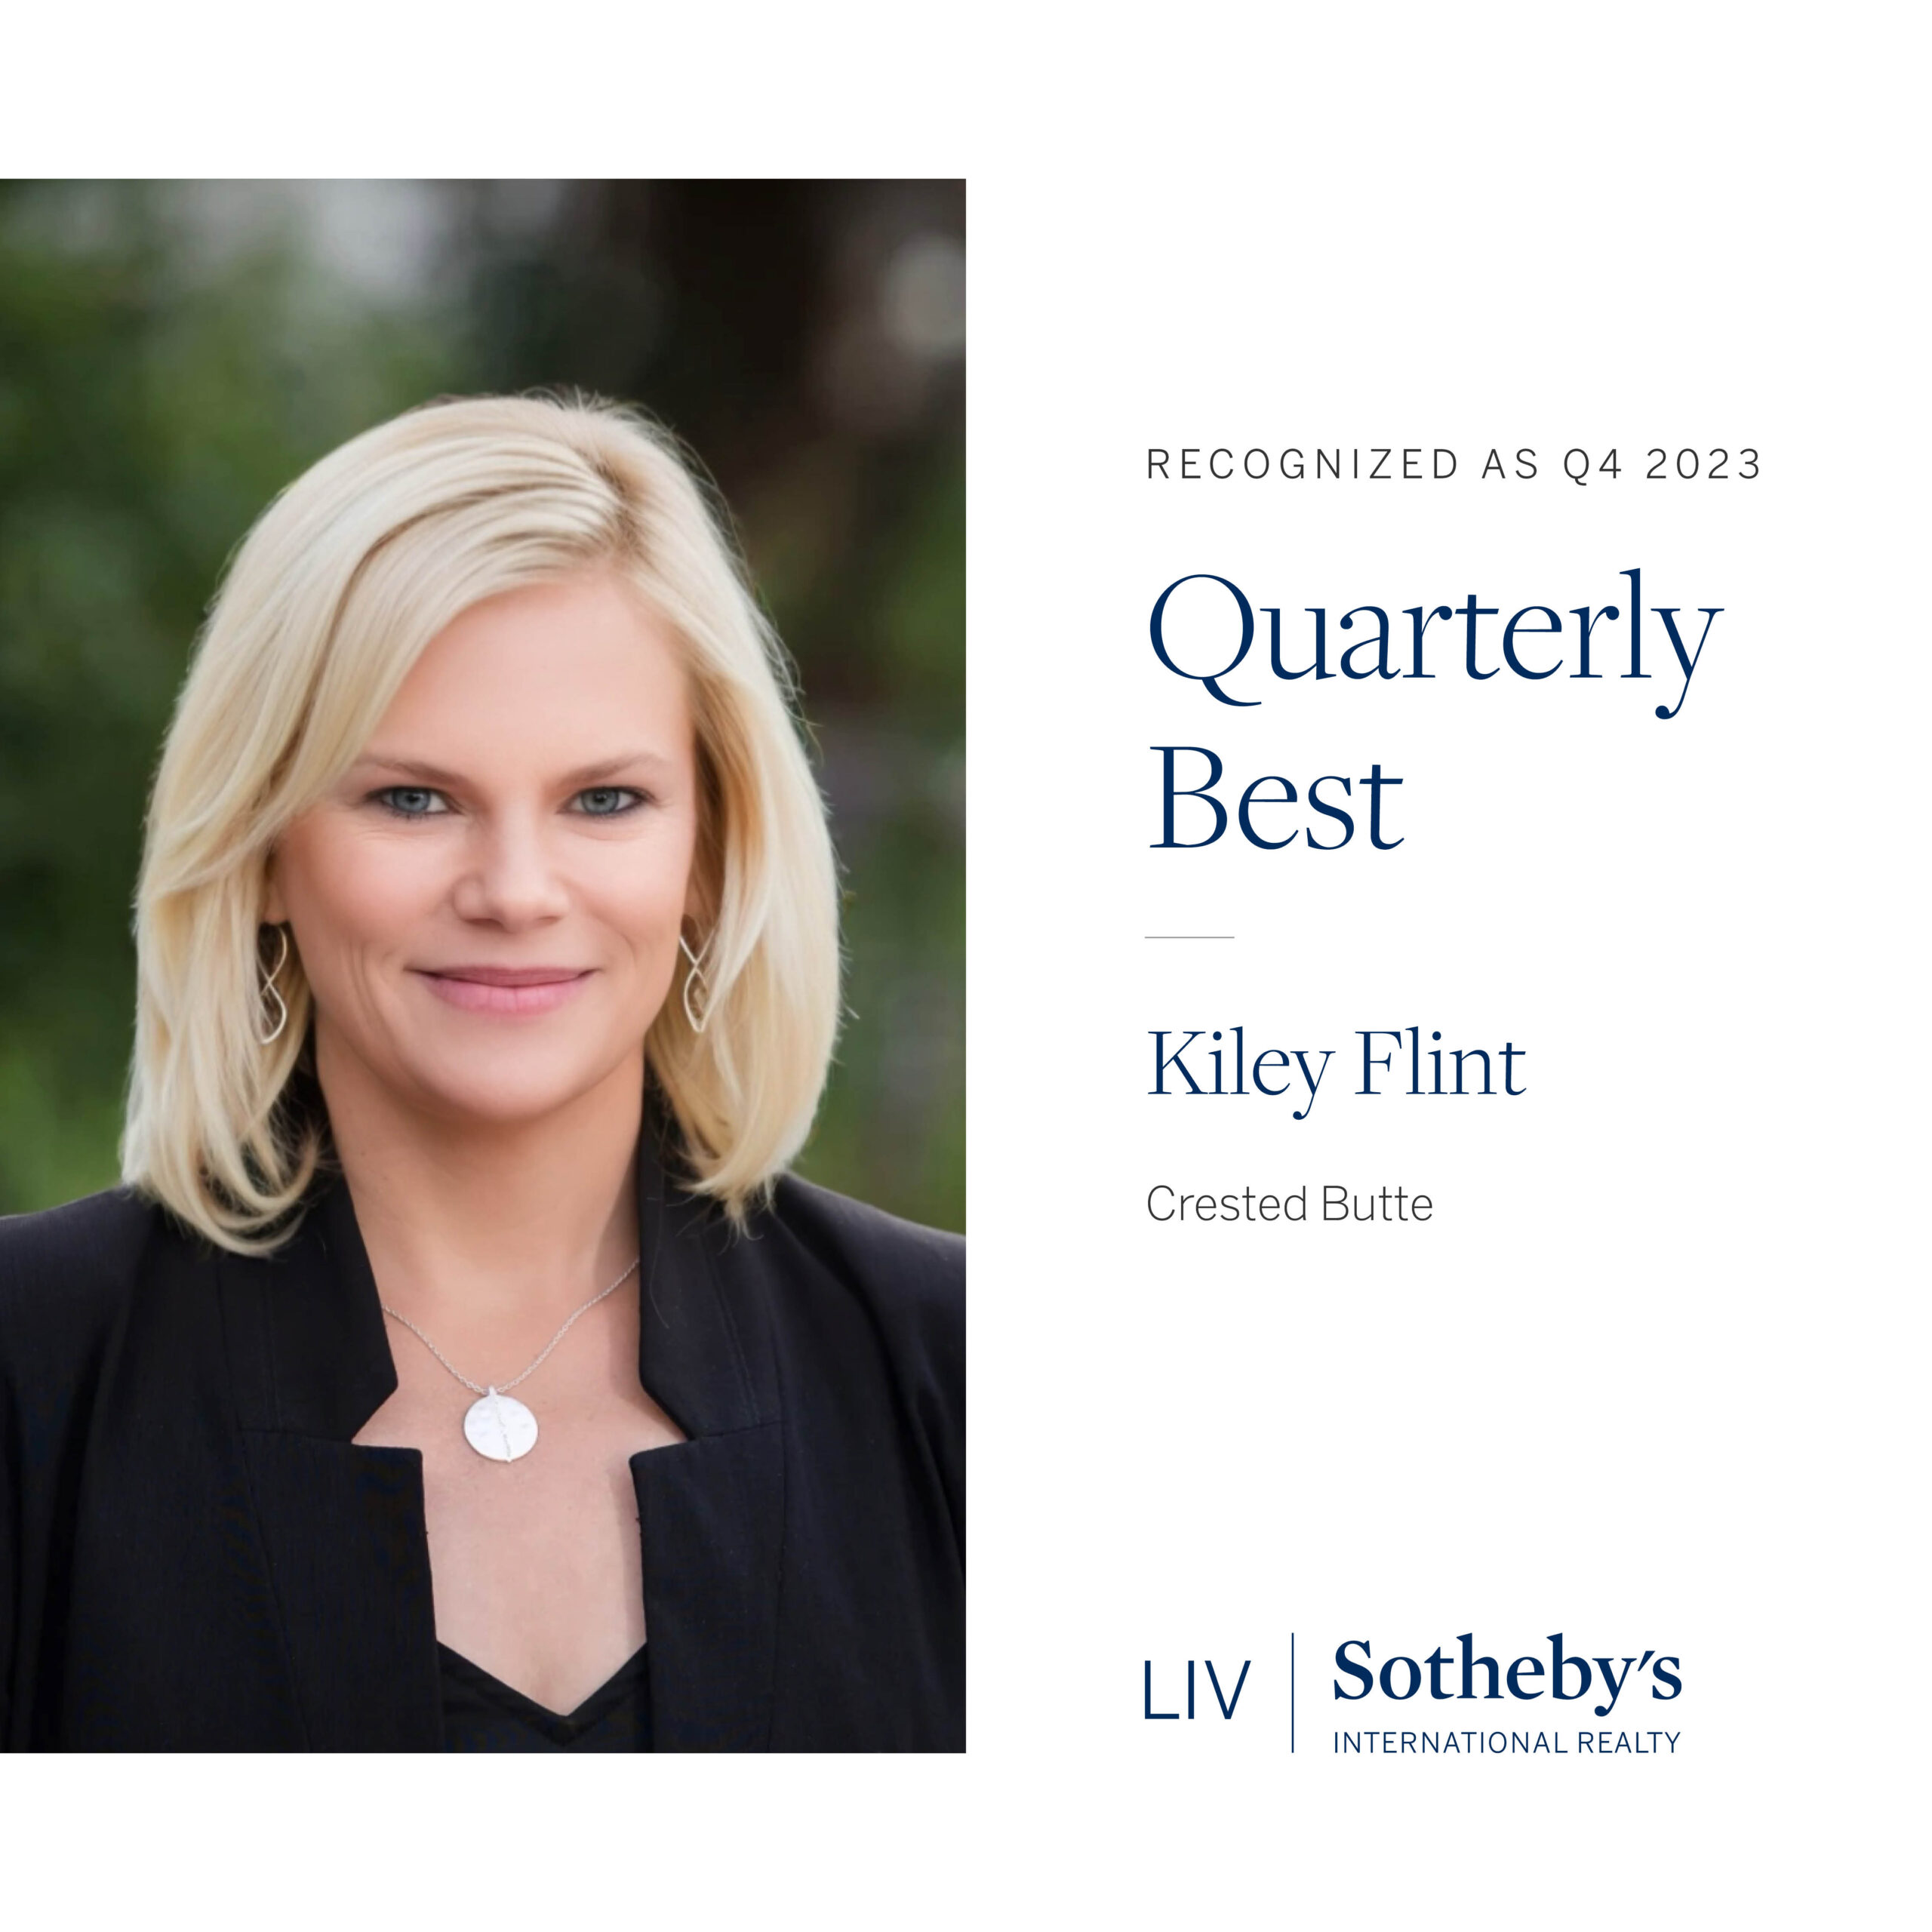 The Crested Butte Collection’s Kiley Flint Named Among LIV Sotheby’s International Realty’s Top Agents for Q4 2023